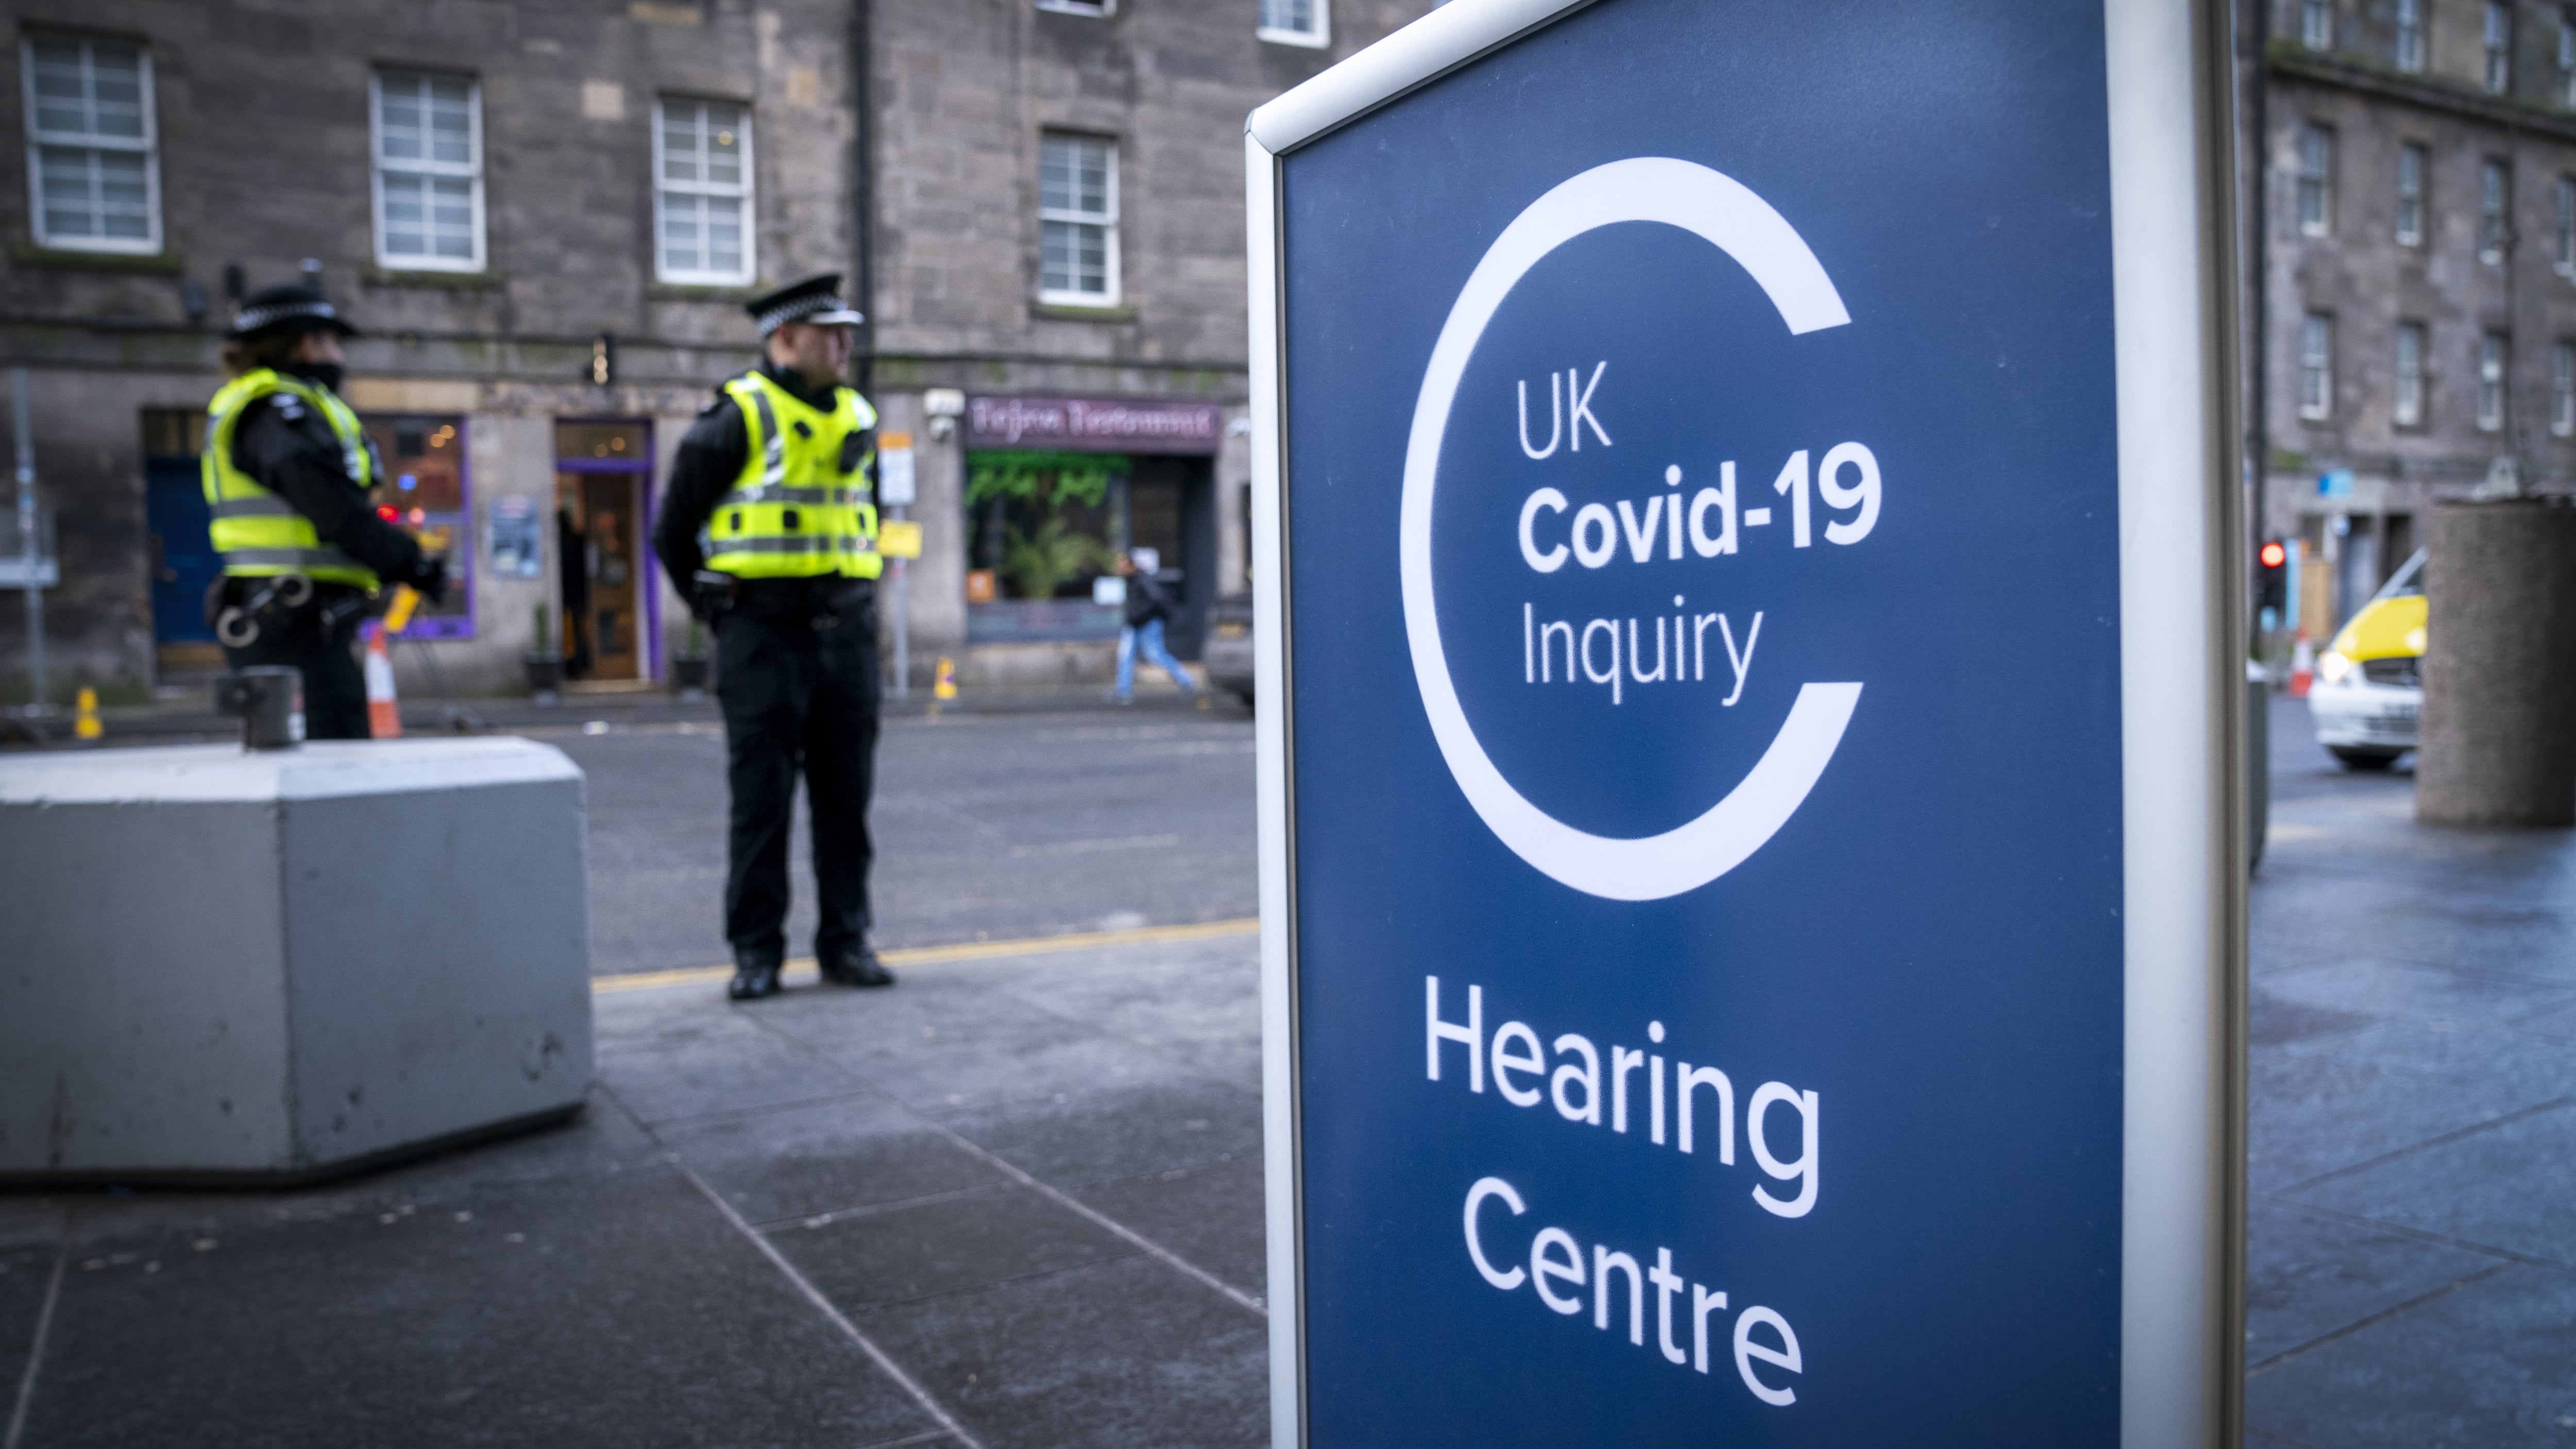 The UK Covid-19 Inquiry has been hearing evidence in Edinburgh